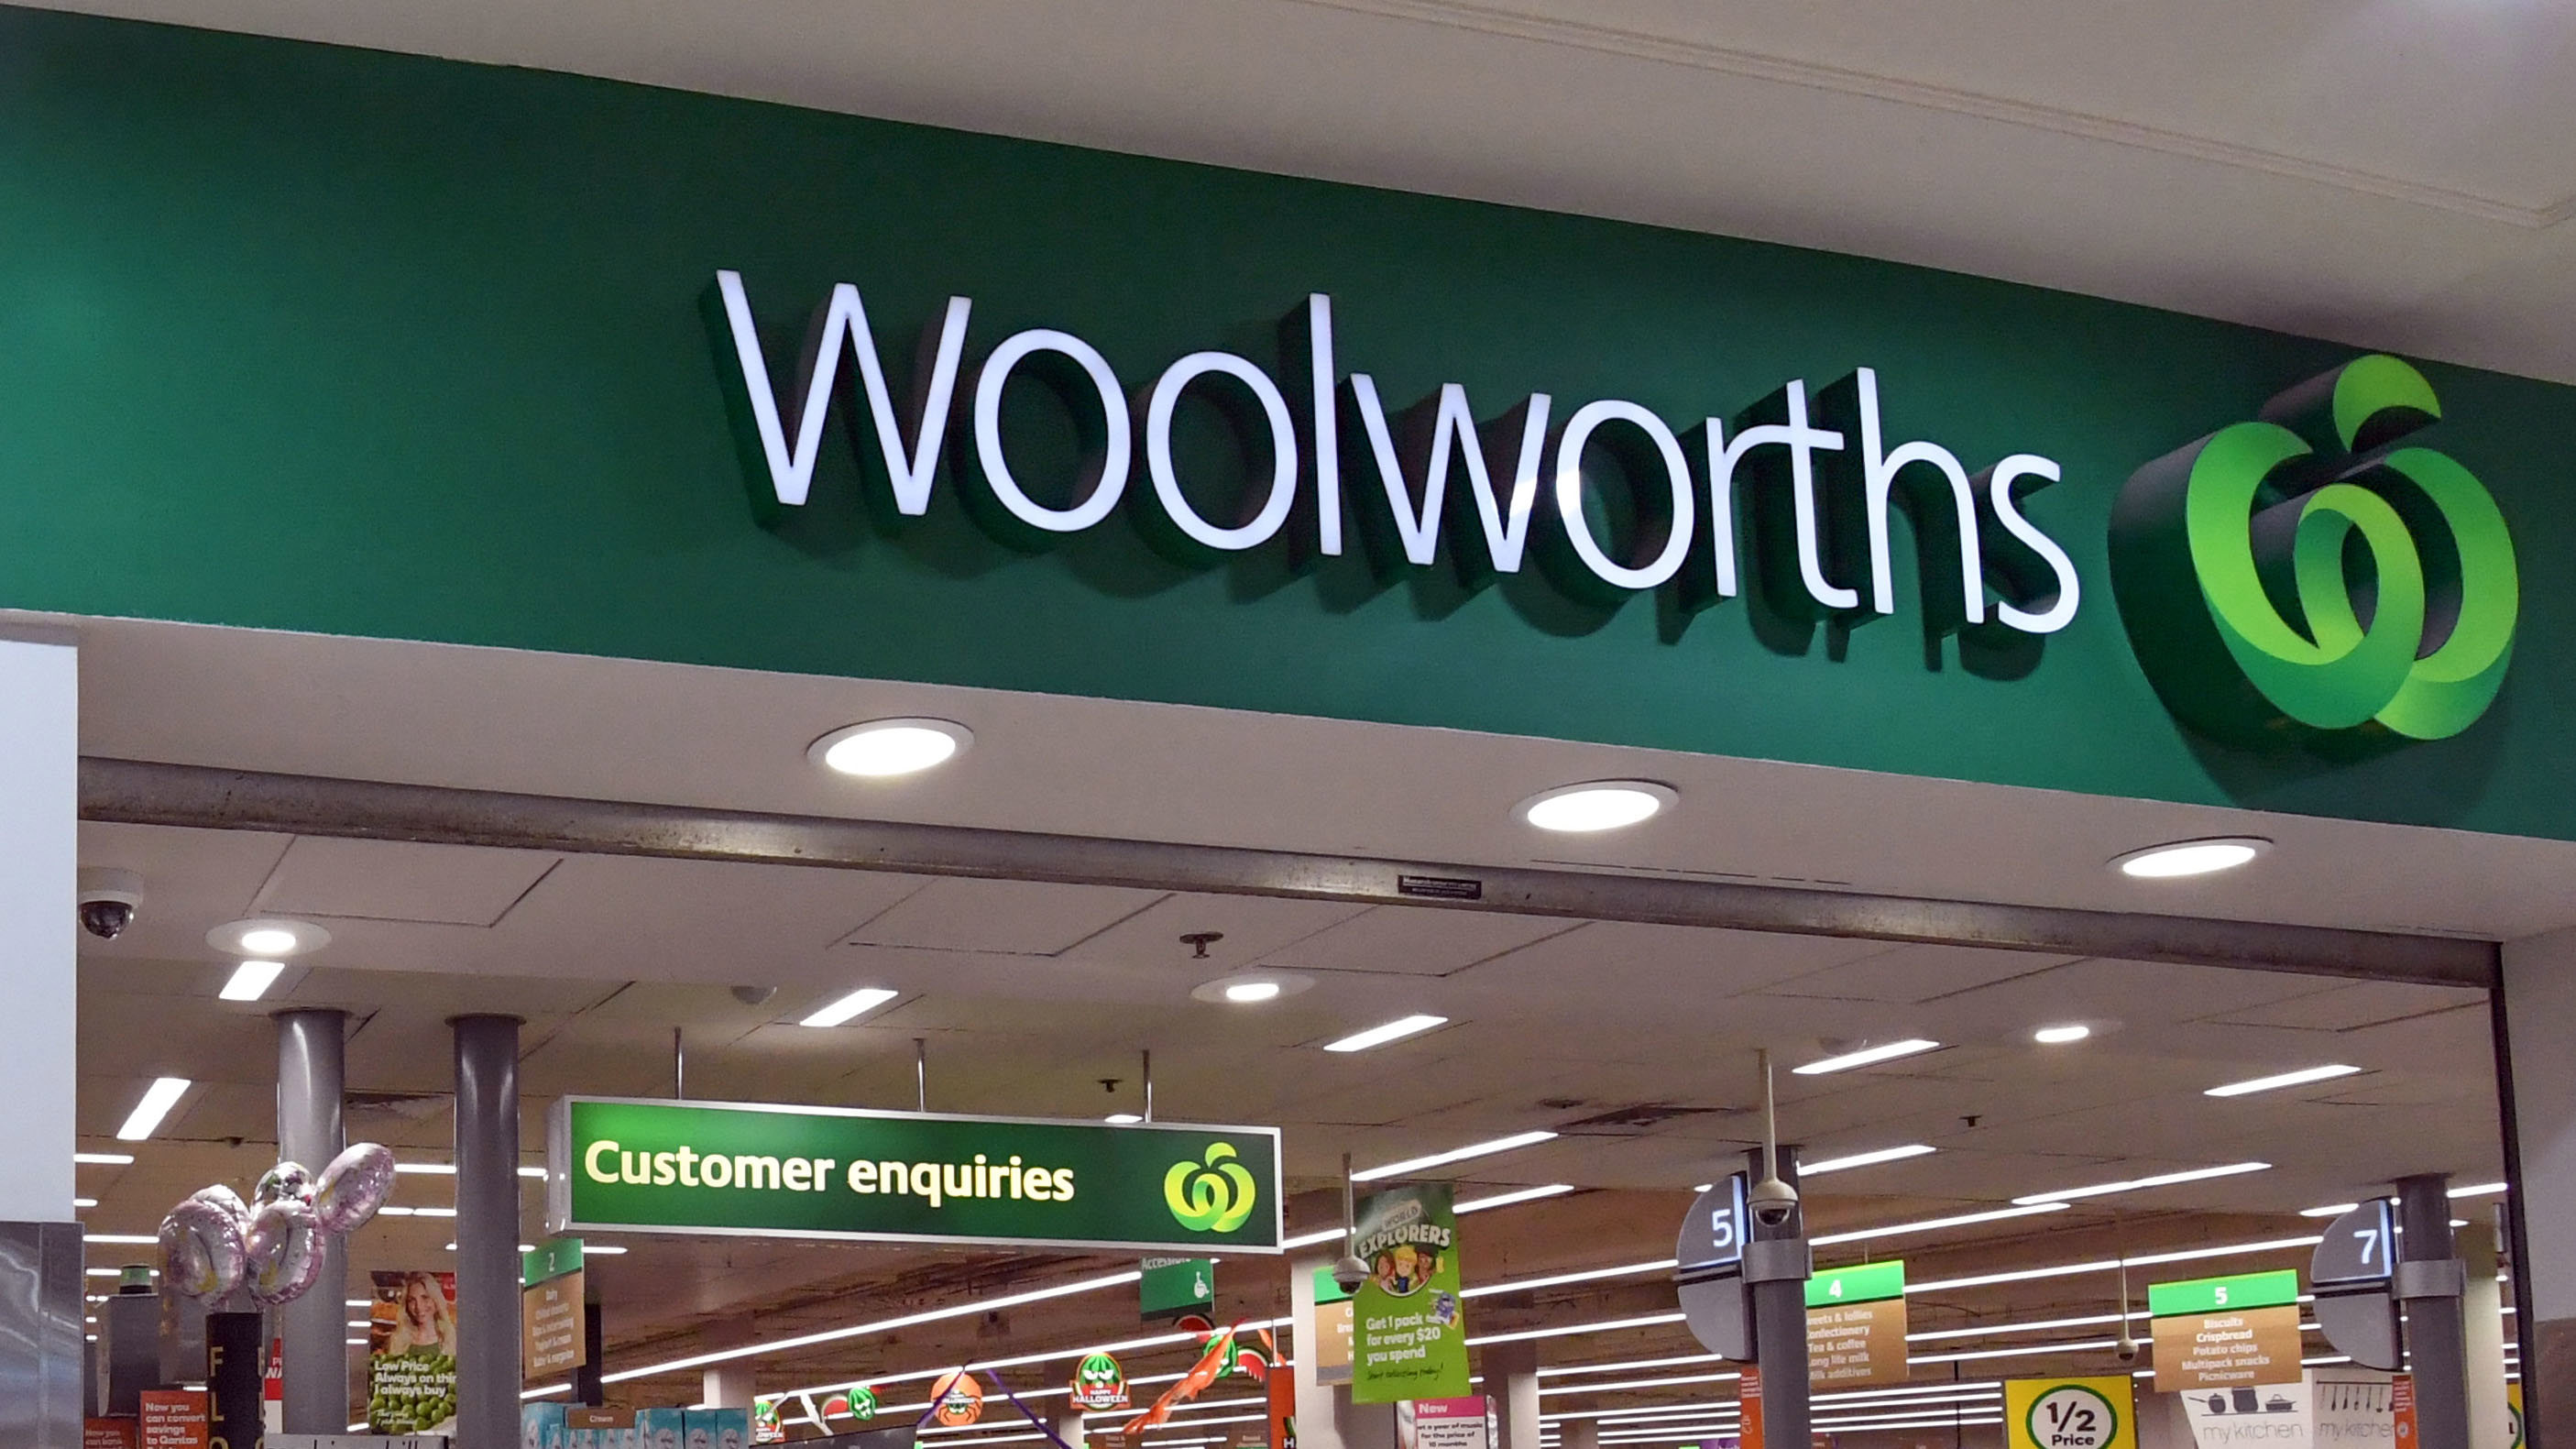 Woolworths Money on the App Store